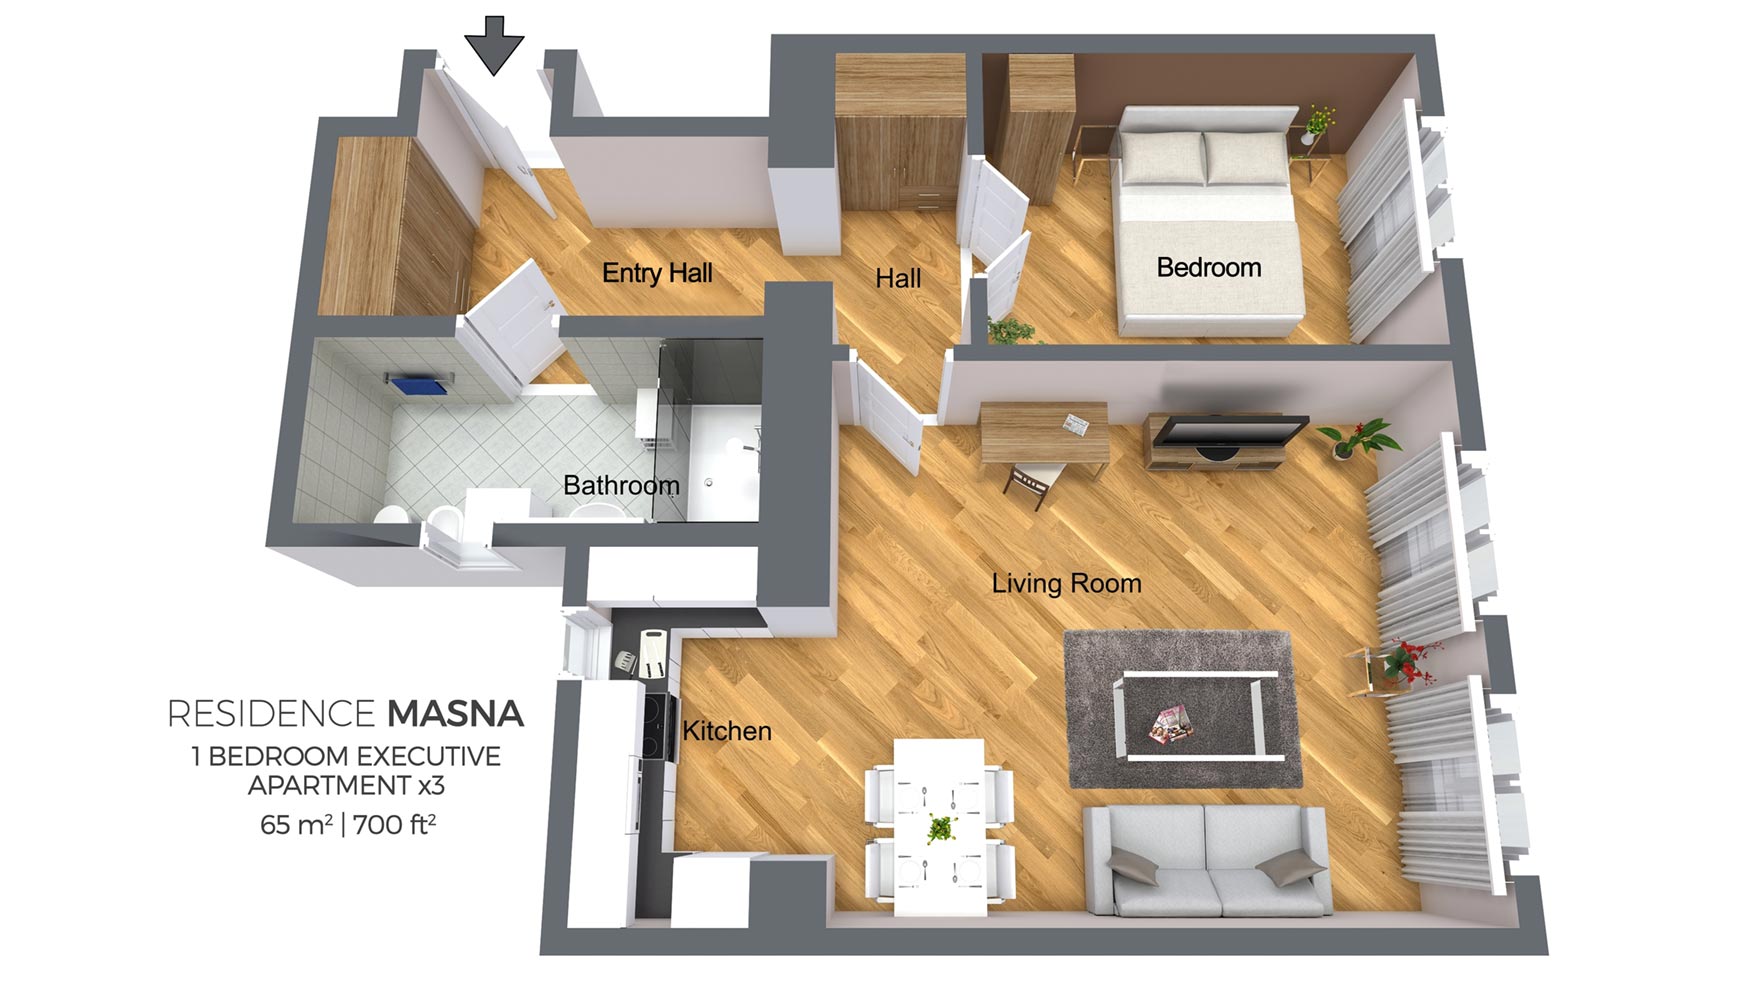 Floorplan of a a one bedroom apartment type 3 in Residence Masna